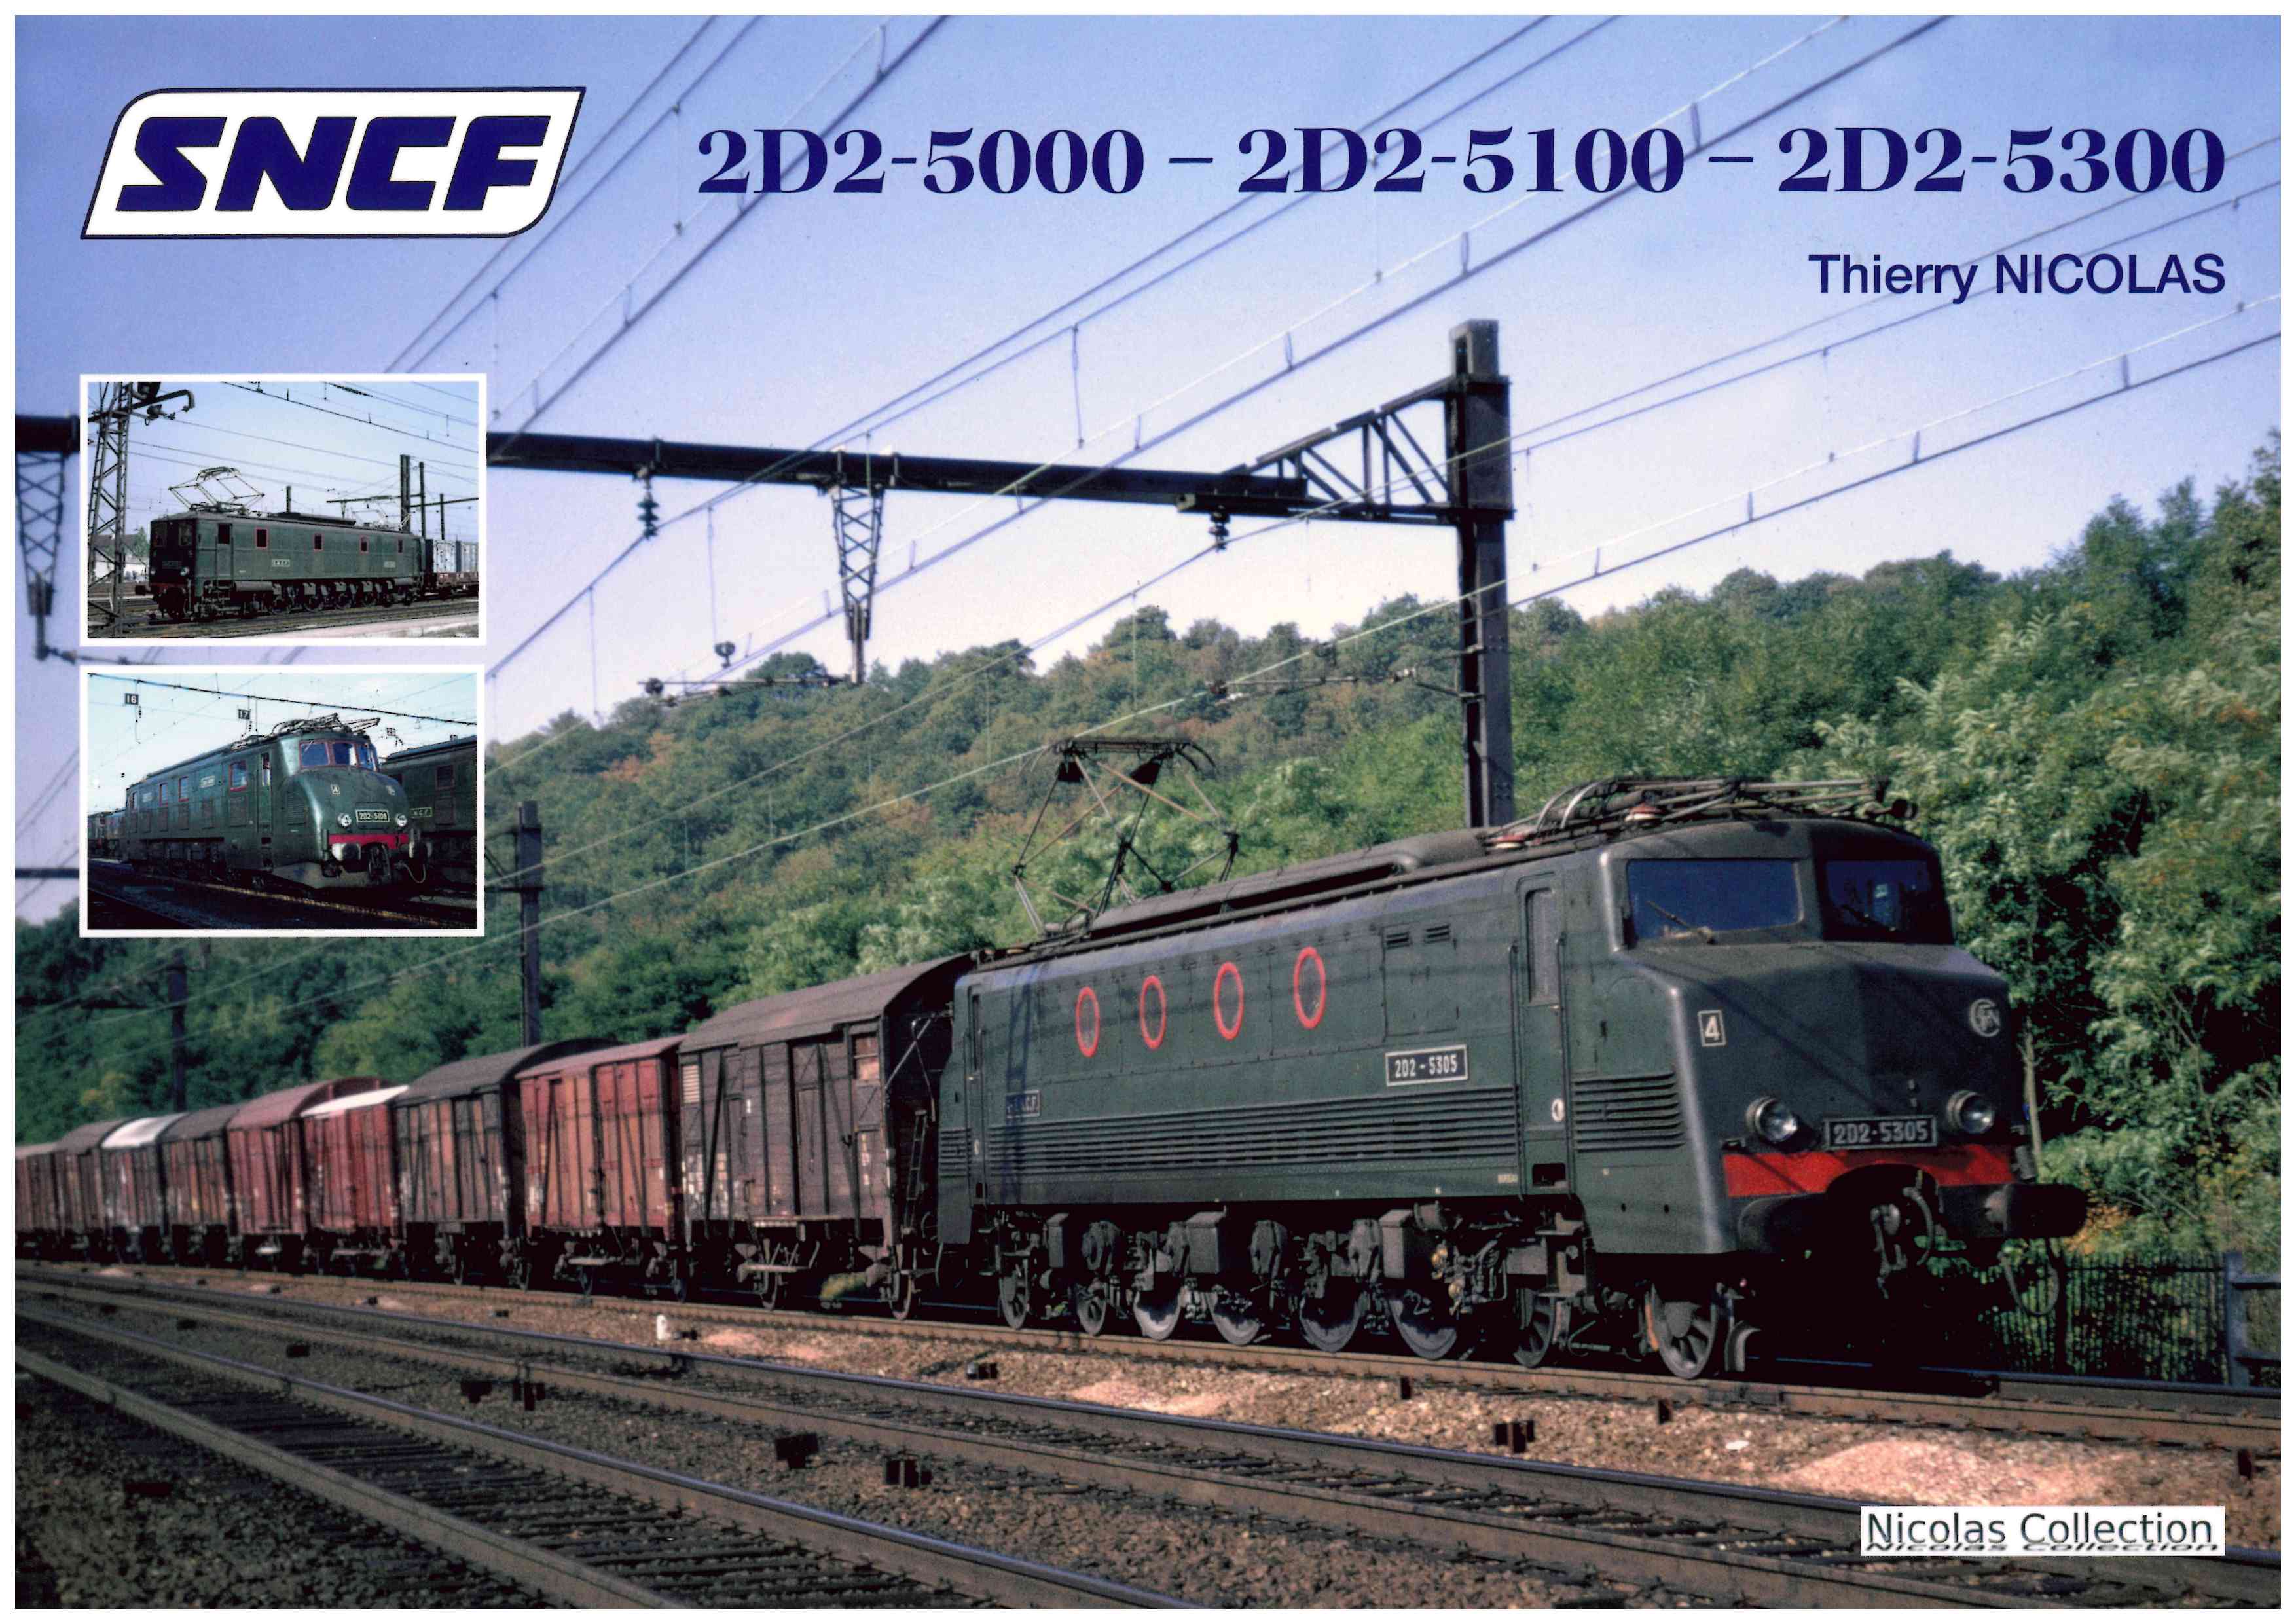 Buch SNCF 2D2 -5000/5100/5300 Thierry Nicolas Collection